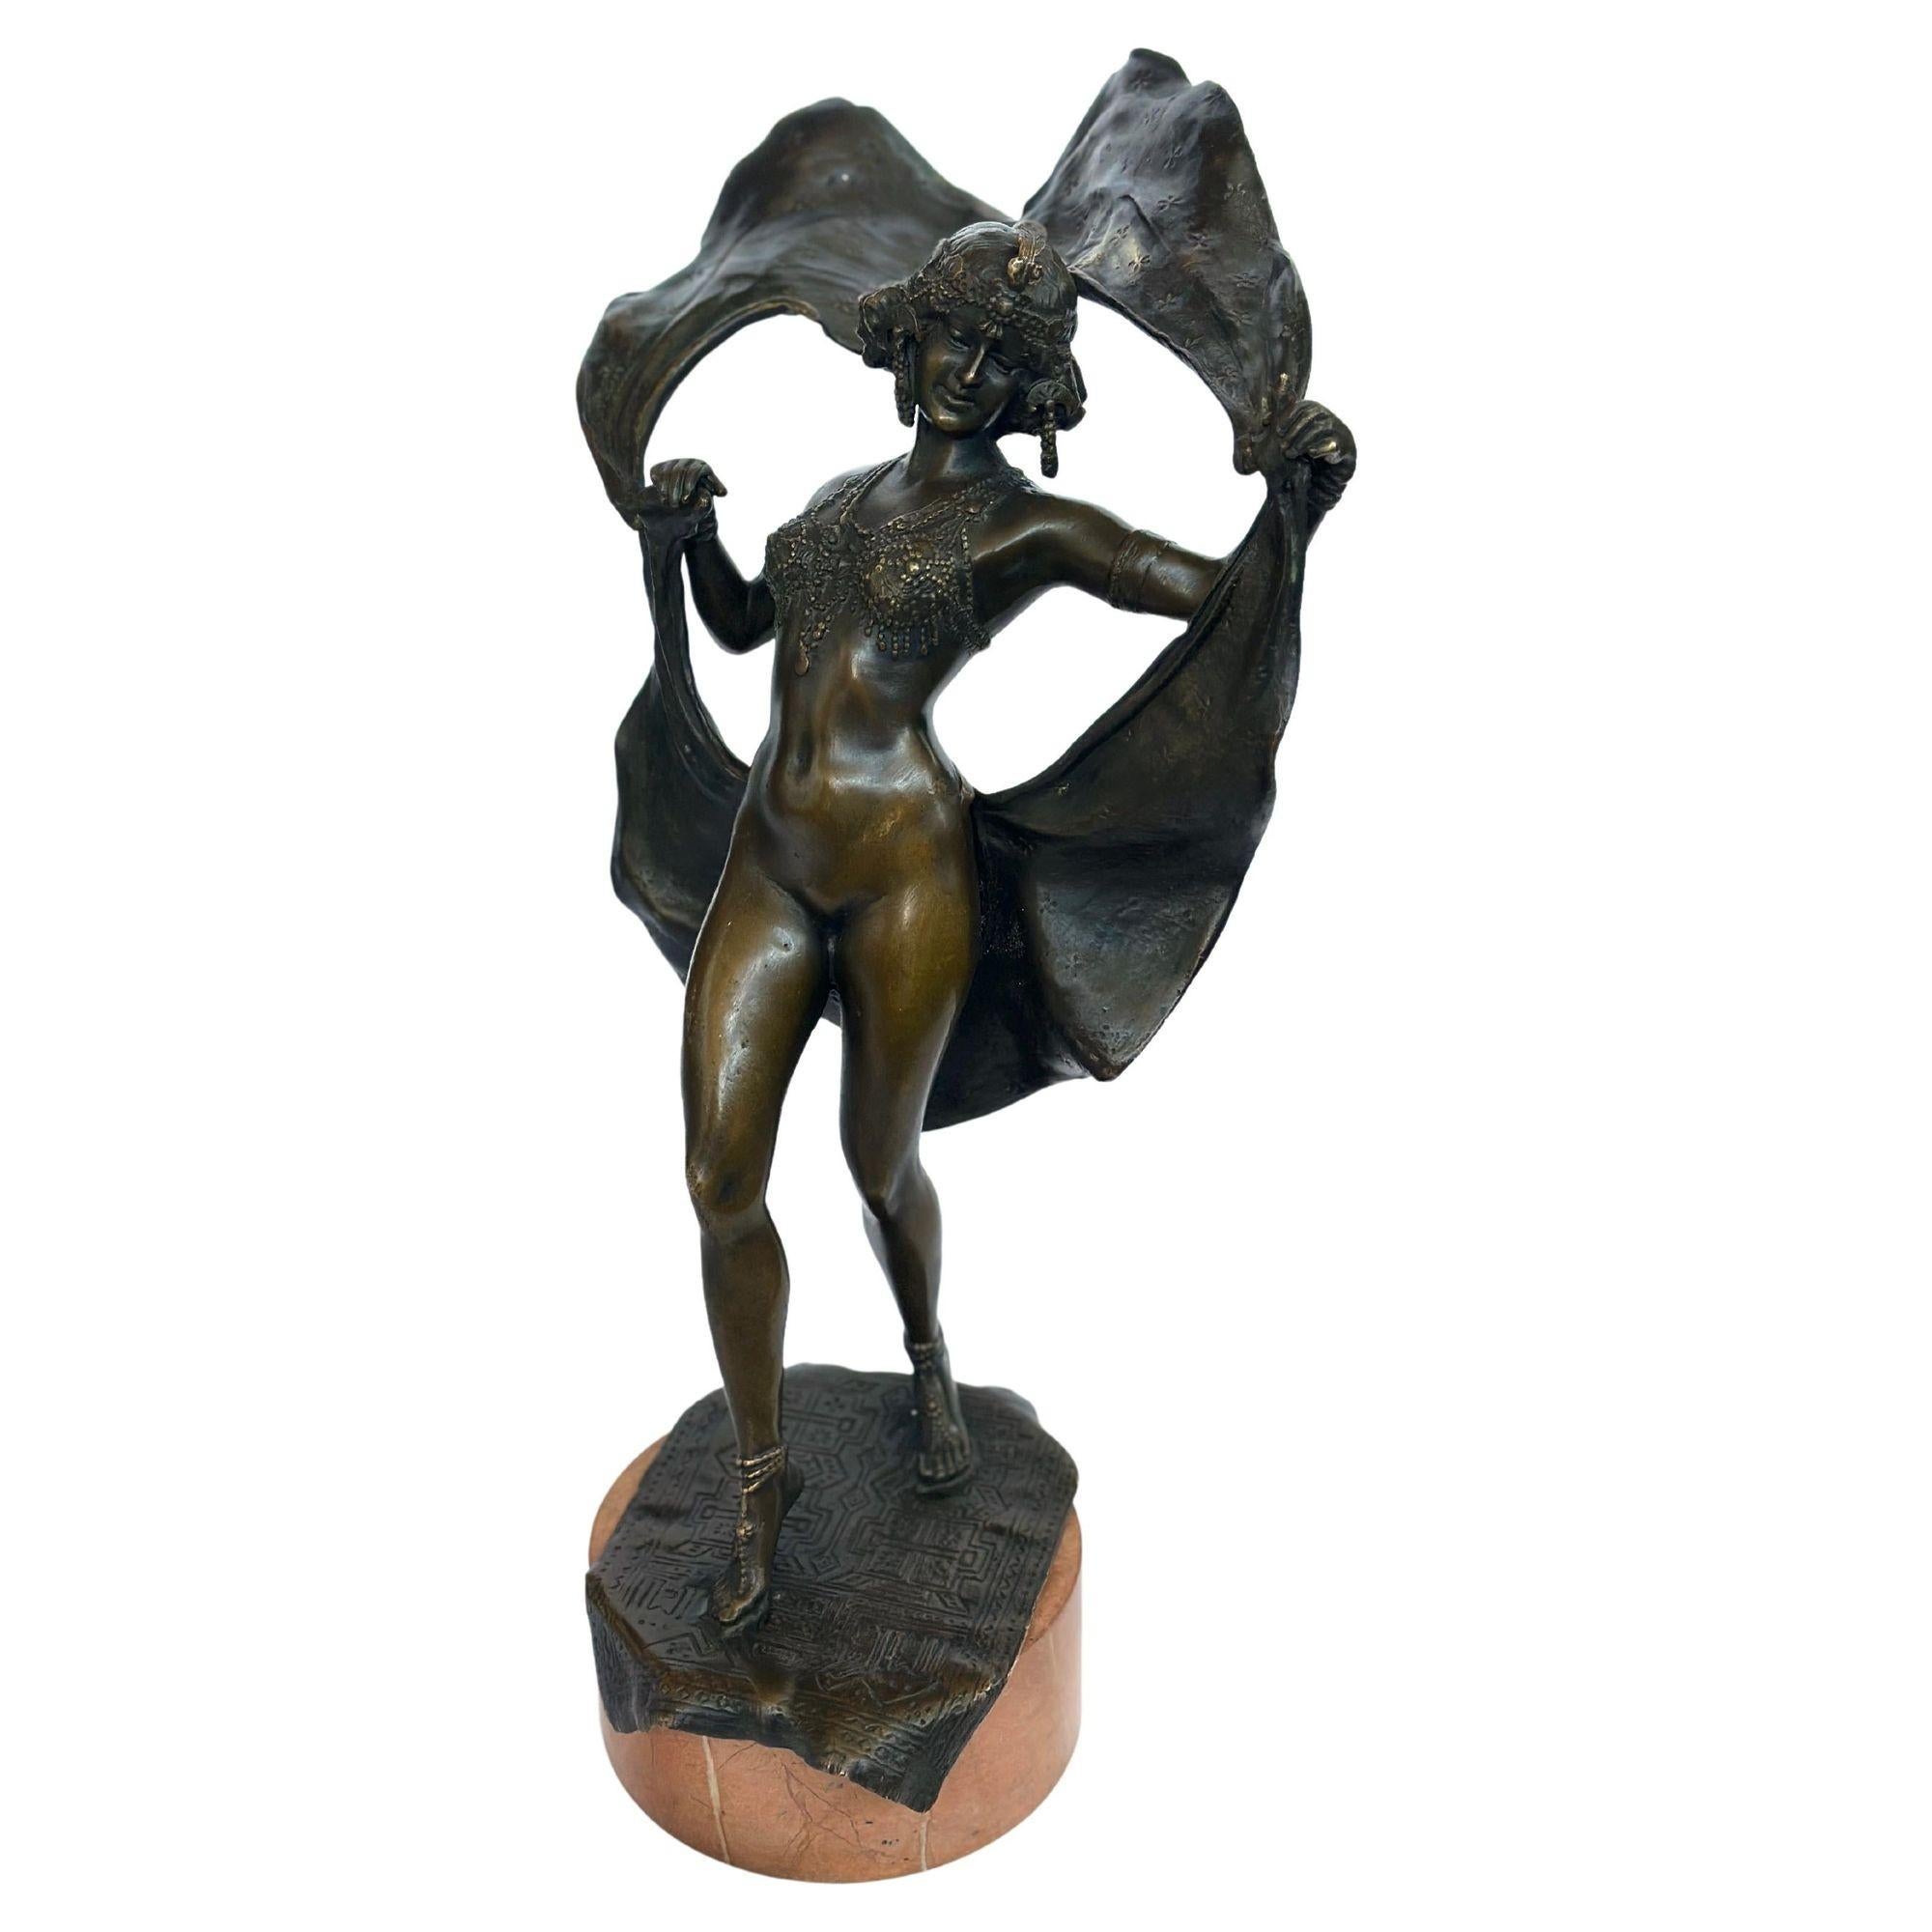 Rare Vienna bronze sculpture by Franz Xaver Bergmann with excellent detail throughout depicting a young exotic dancer swirling her skirt hinged to lift and reveal her naked body standing on a stone base. Faint 